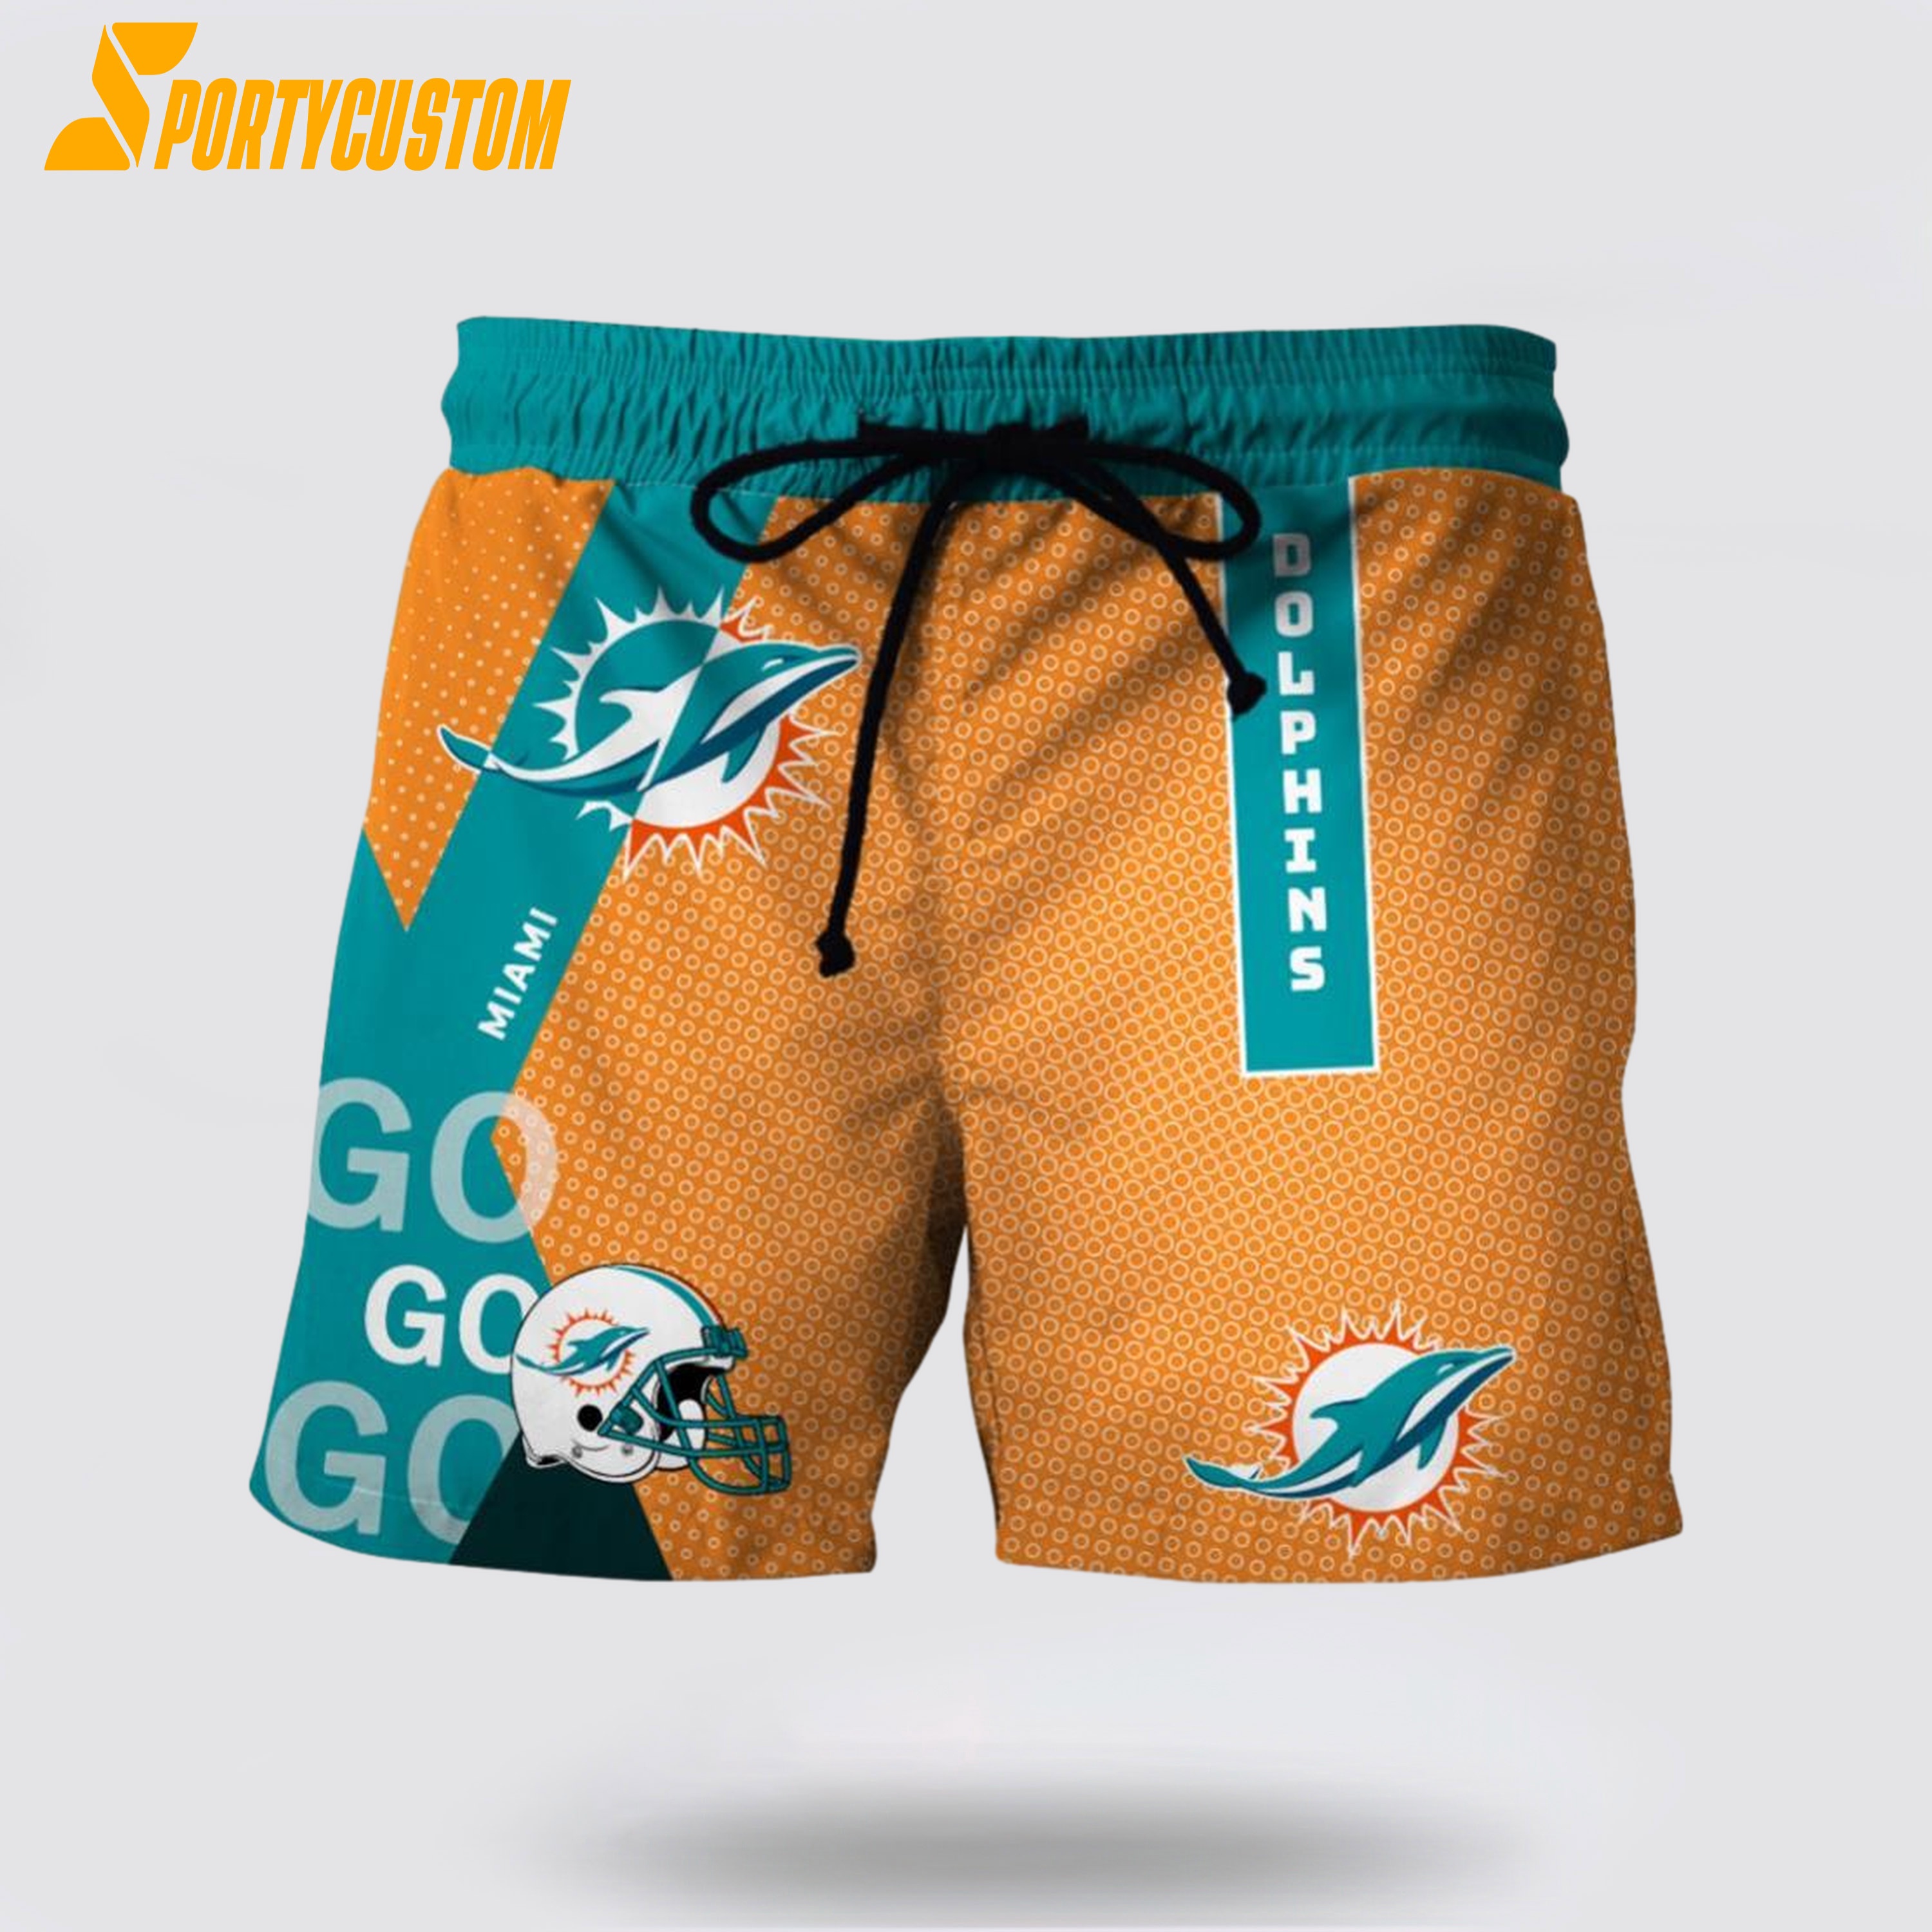 Miami Dolphins Shop - Miami Dolphins Mens Nfl Beach Board Shorts Best Gift For Fans